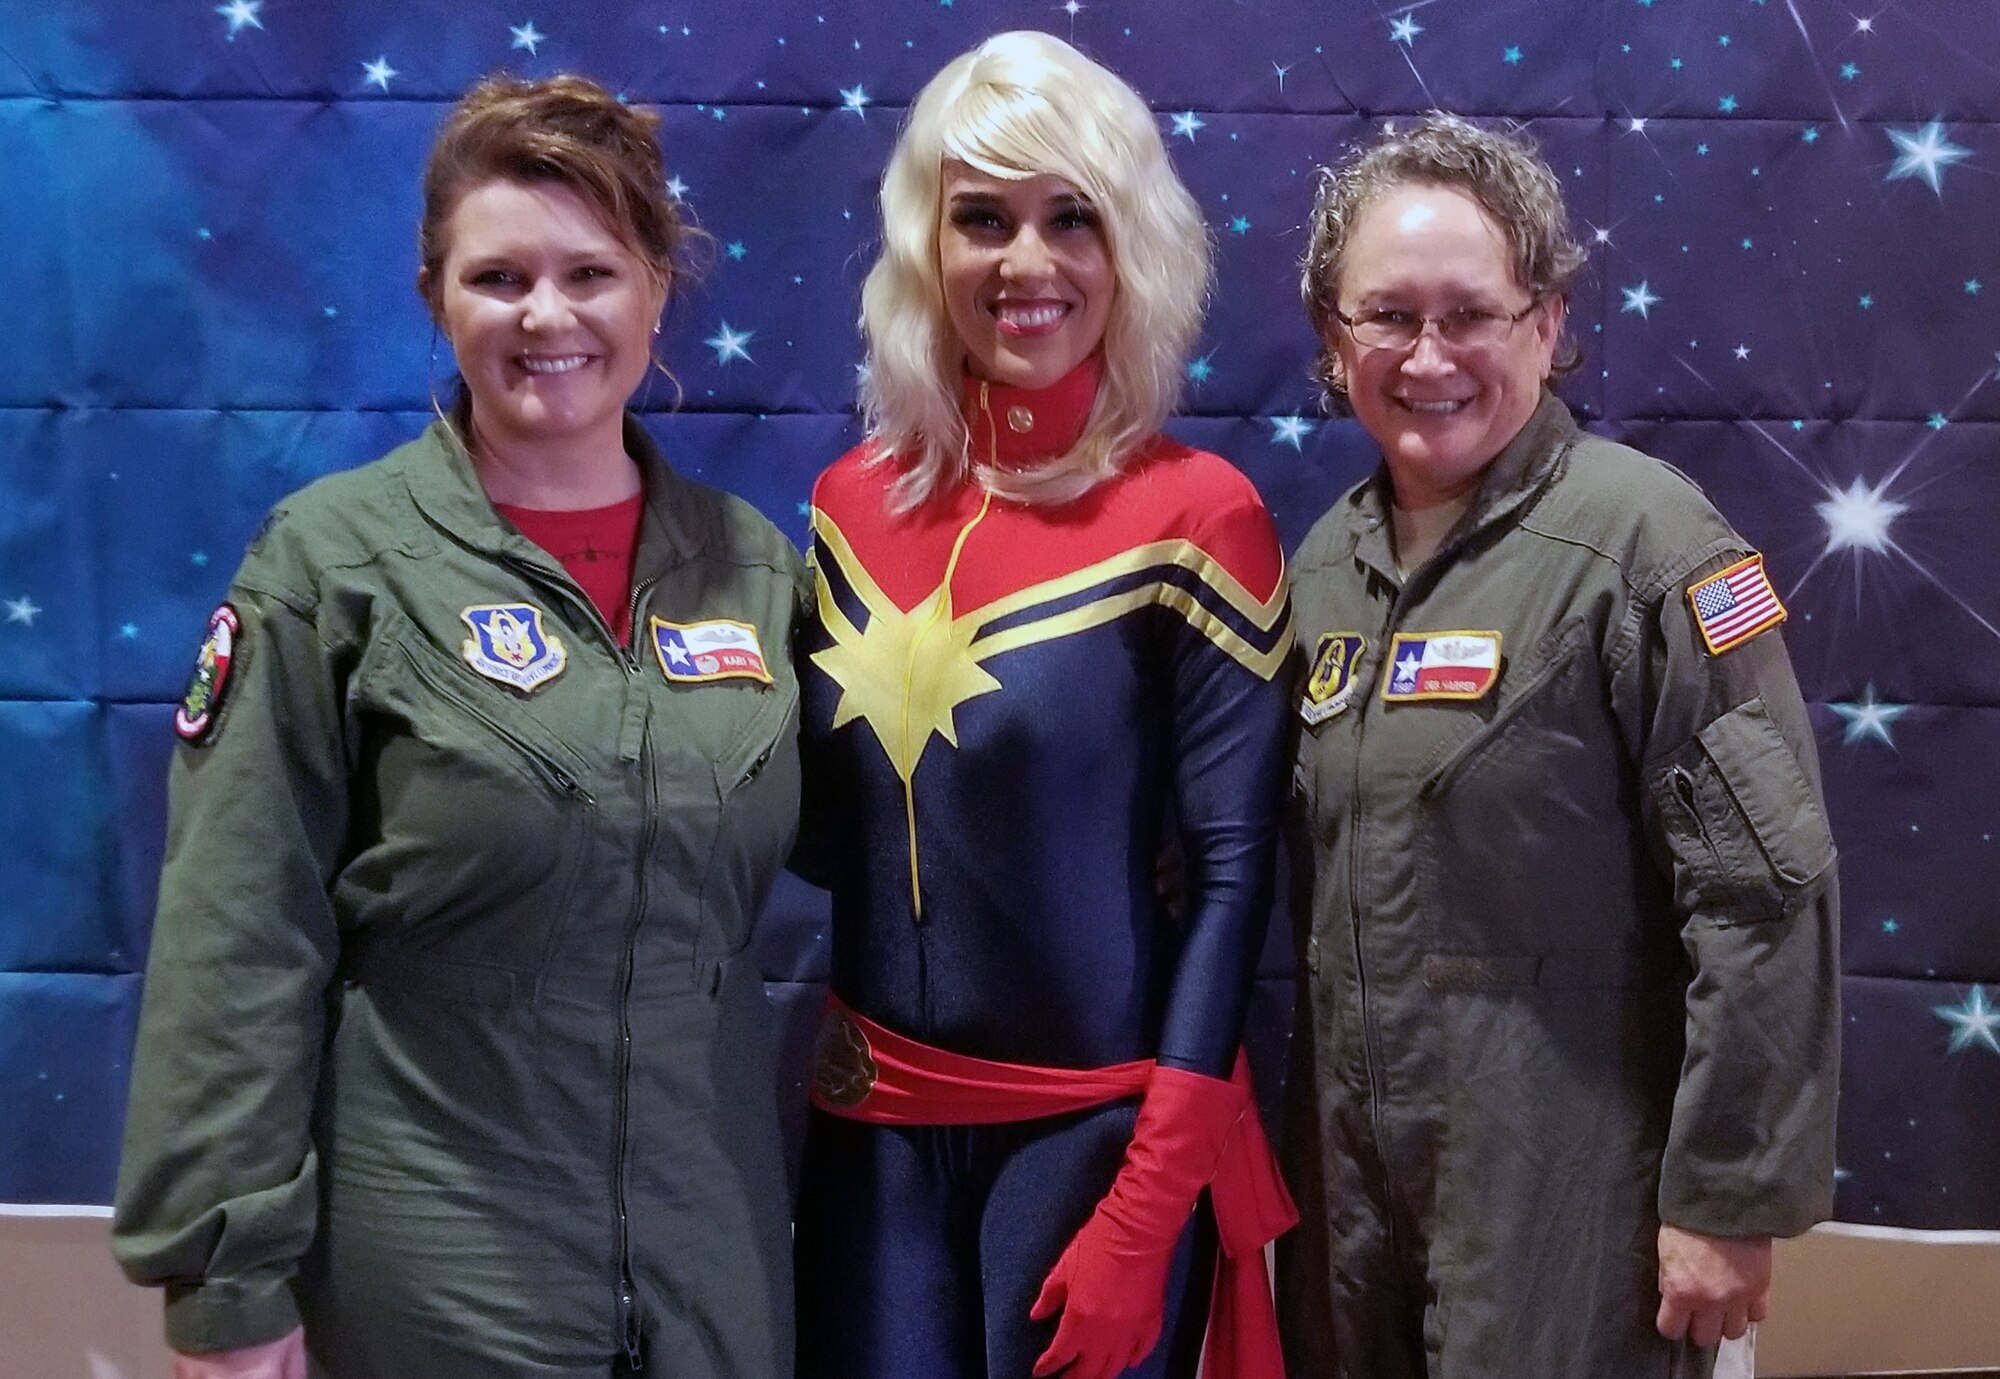 Lt. Col. Kari Hill, 433rd Operations Support Squadron commander/pilot, and Tech. Sgt. Debra Hill, 68th Airlift Squadron loadmaster, both with Joint Base San Antonio-Lackland, Texas, pose with Rebecca Sorenson, owner of Chic Basics, and a domestic engineer, March 23, 2019, during the “Marvelous Women Don’t Need Capes” event at the Alamo Drafthouse movie cinema in San Antonio.